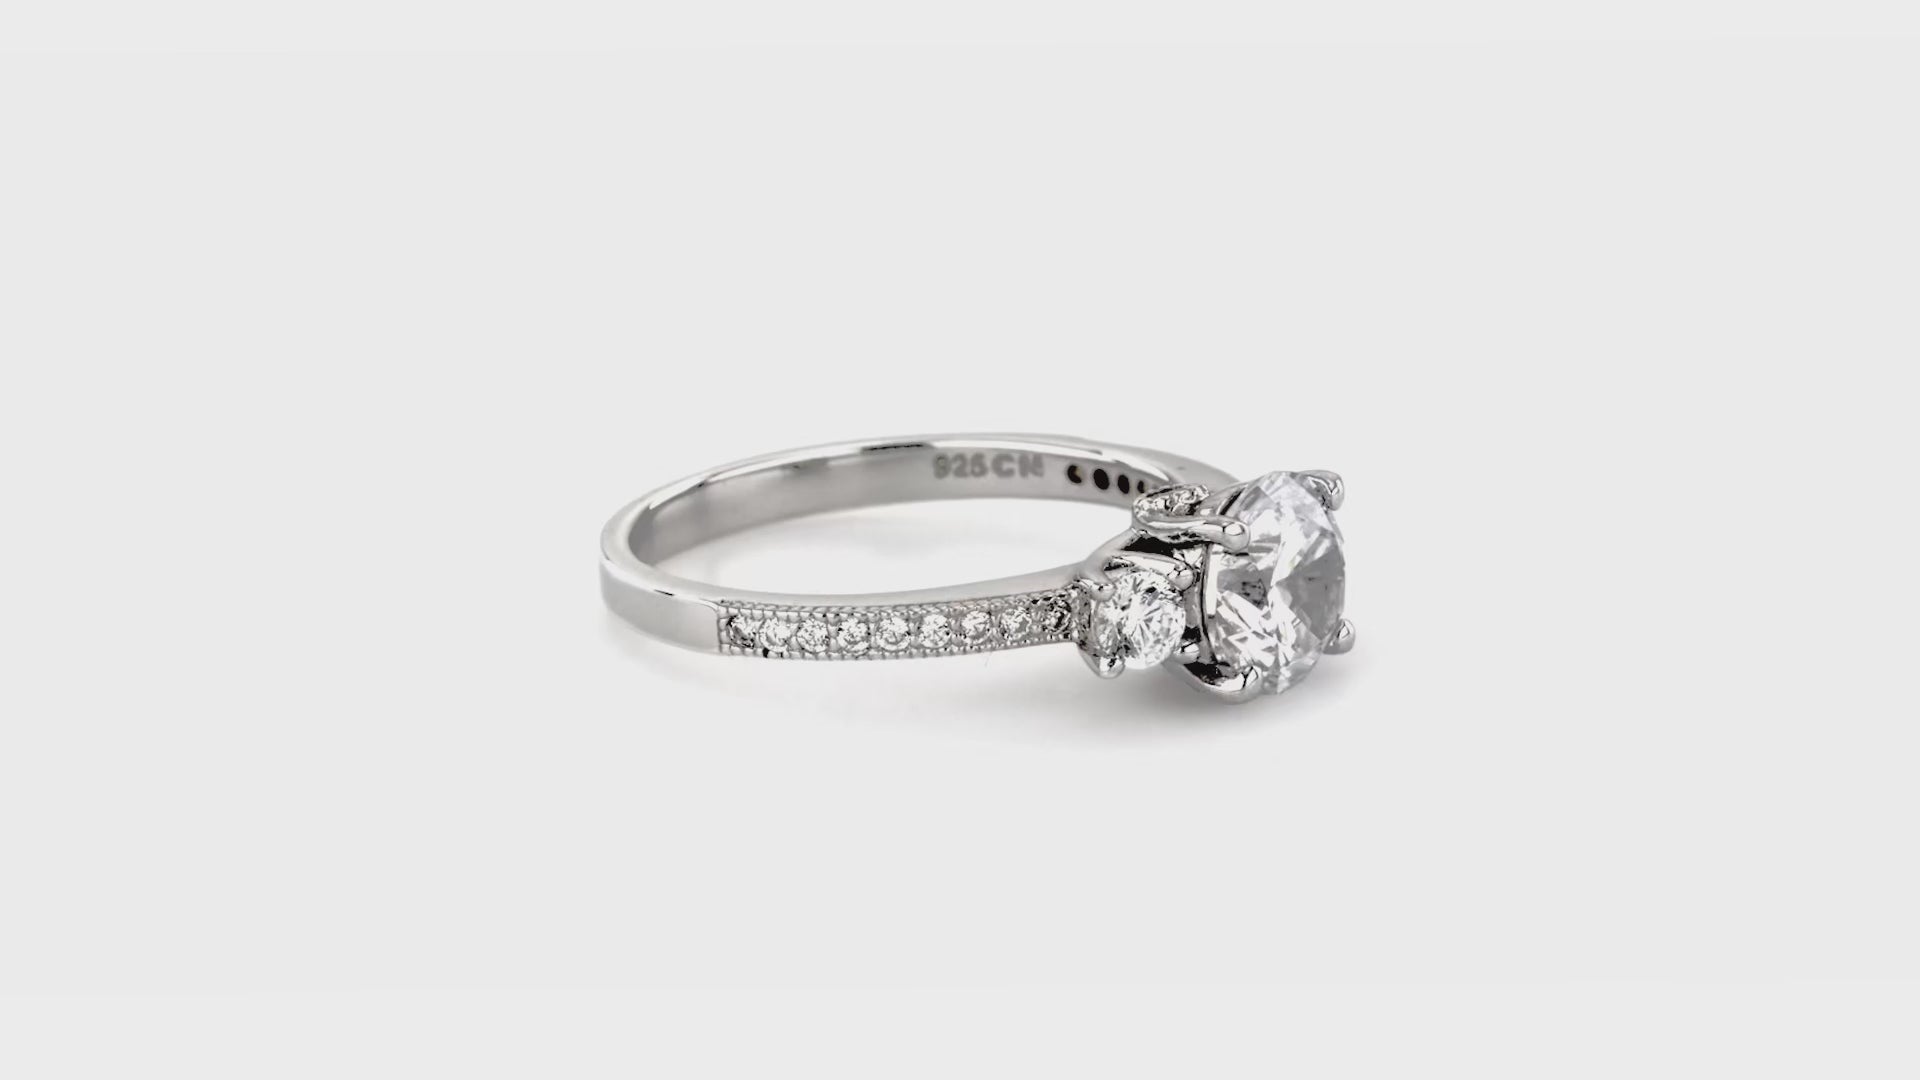 Video Contains 3-Stone Round CZ Ring Set in Sterling Silver. Style Number R537